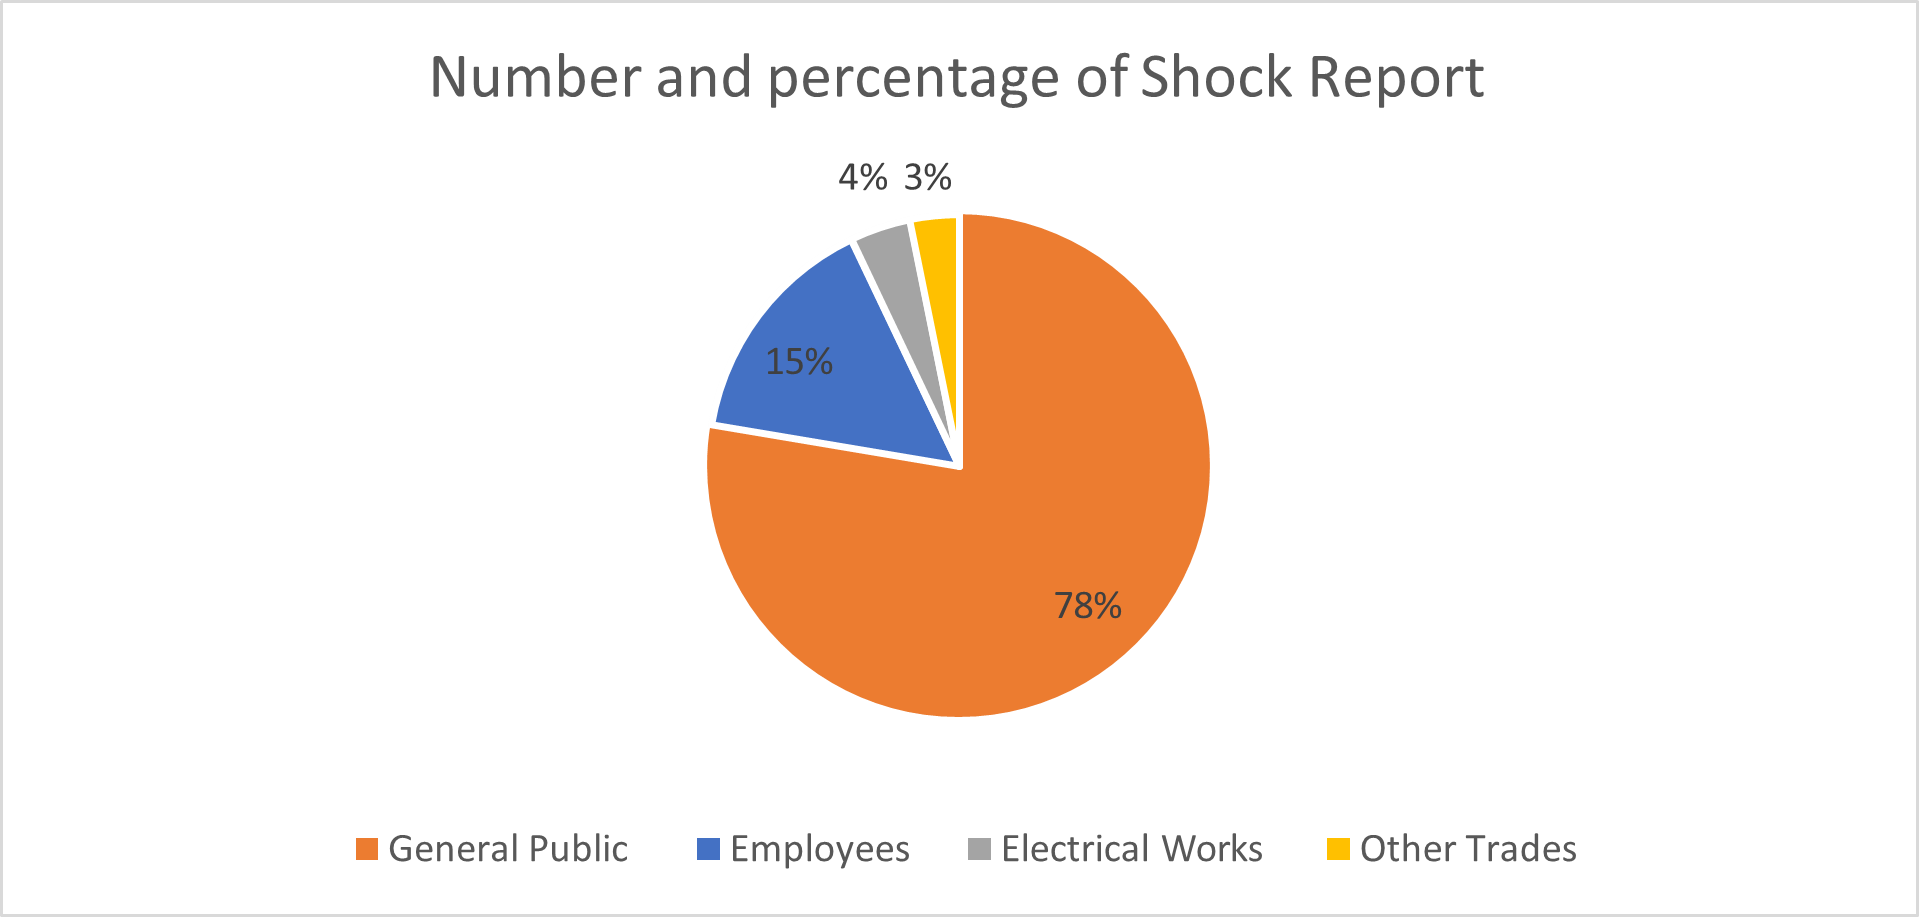 Pie Chart showing Electrical Workers received 4% of electrical shocks, Employees  15%, General Public 78%, and Other Trades 3%.